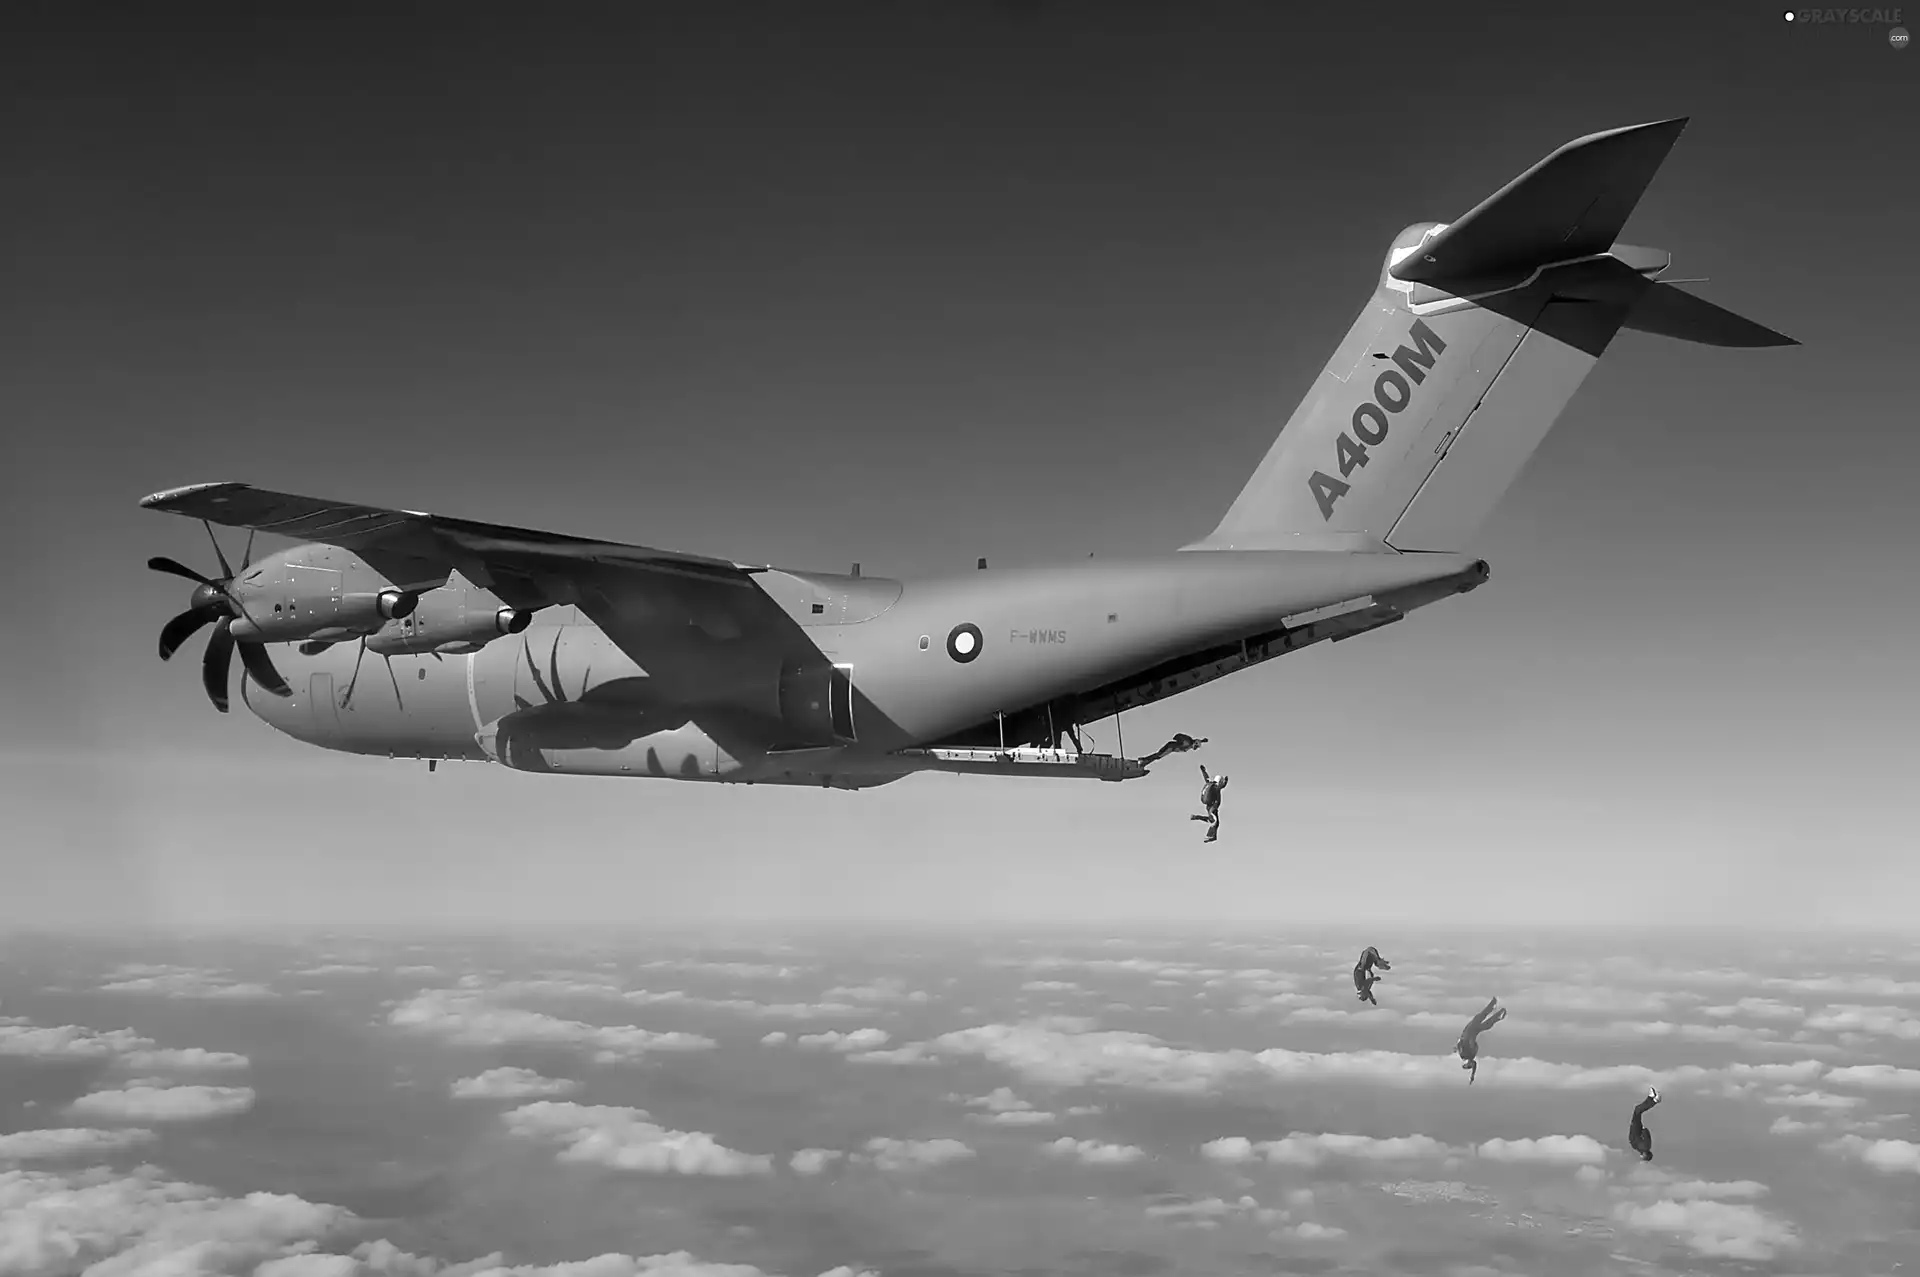 plane, A400M, Paratroopers, Airbus